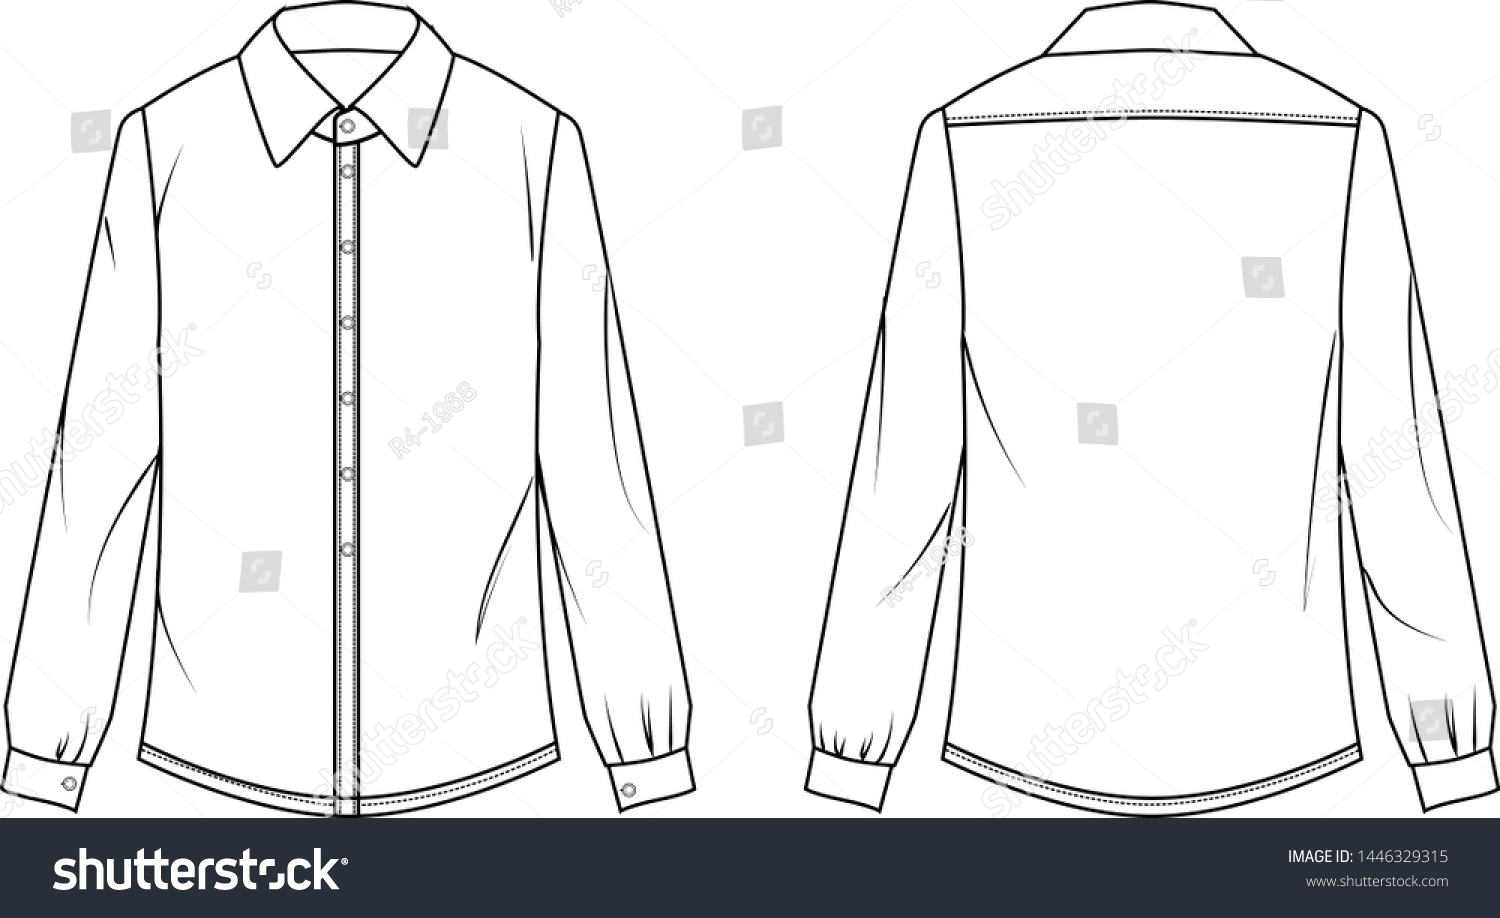 Blouse Vector Lady Template Stock Vector (Royalty Free) 1446329315 ...